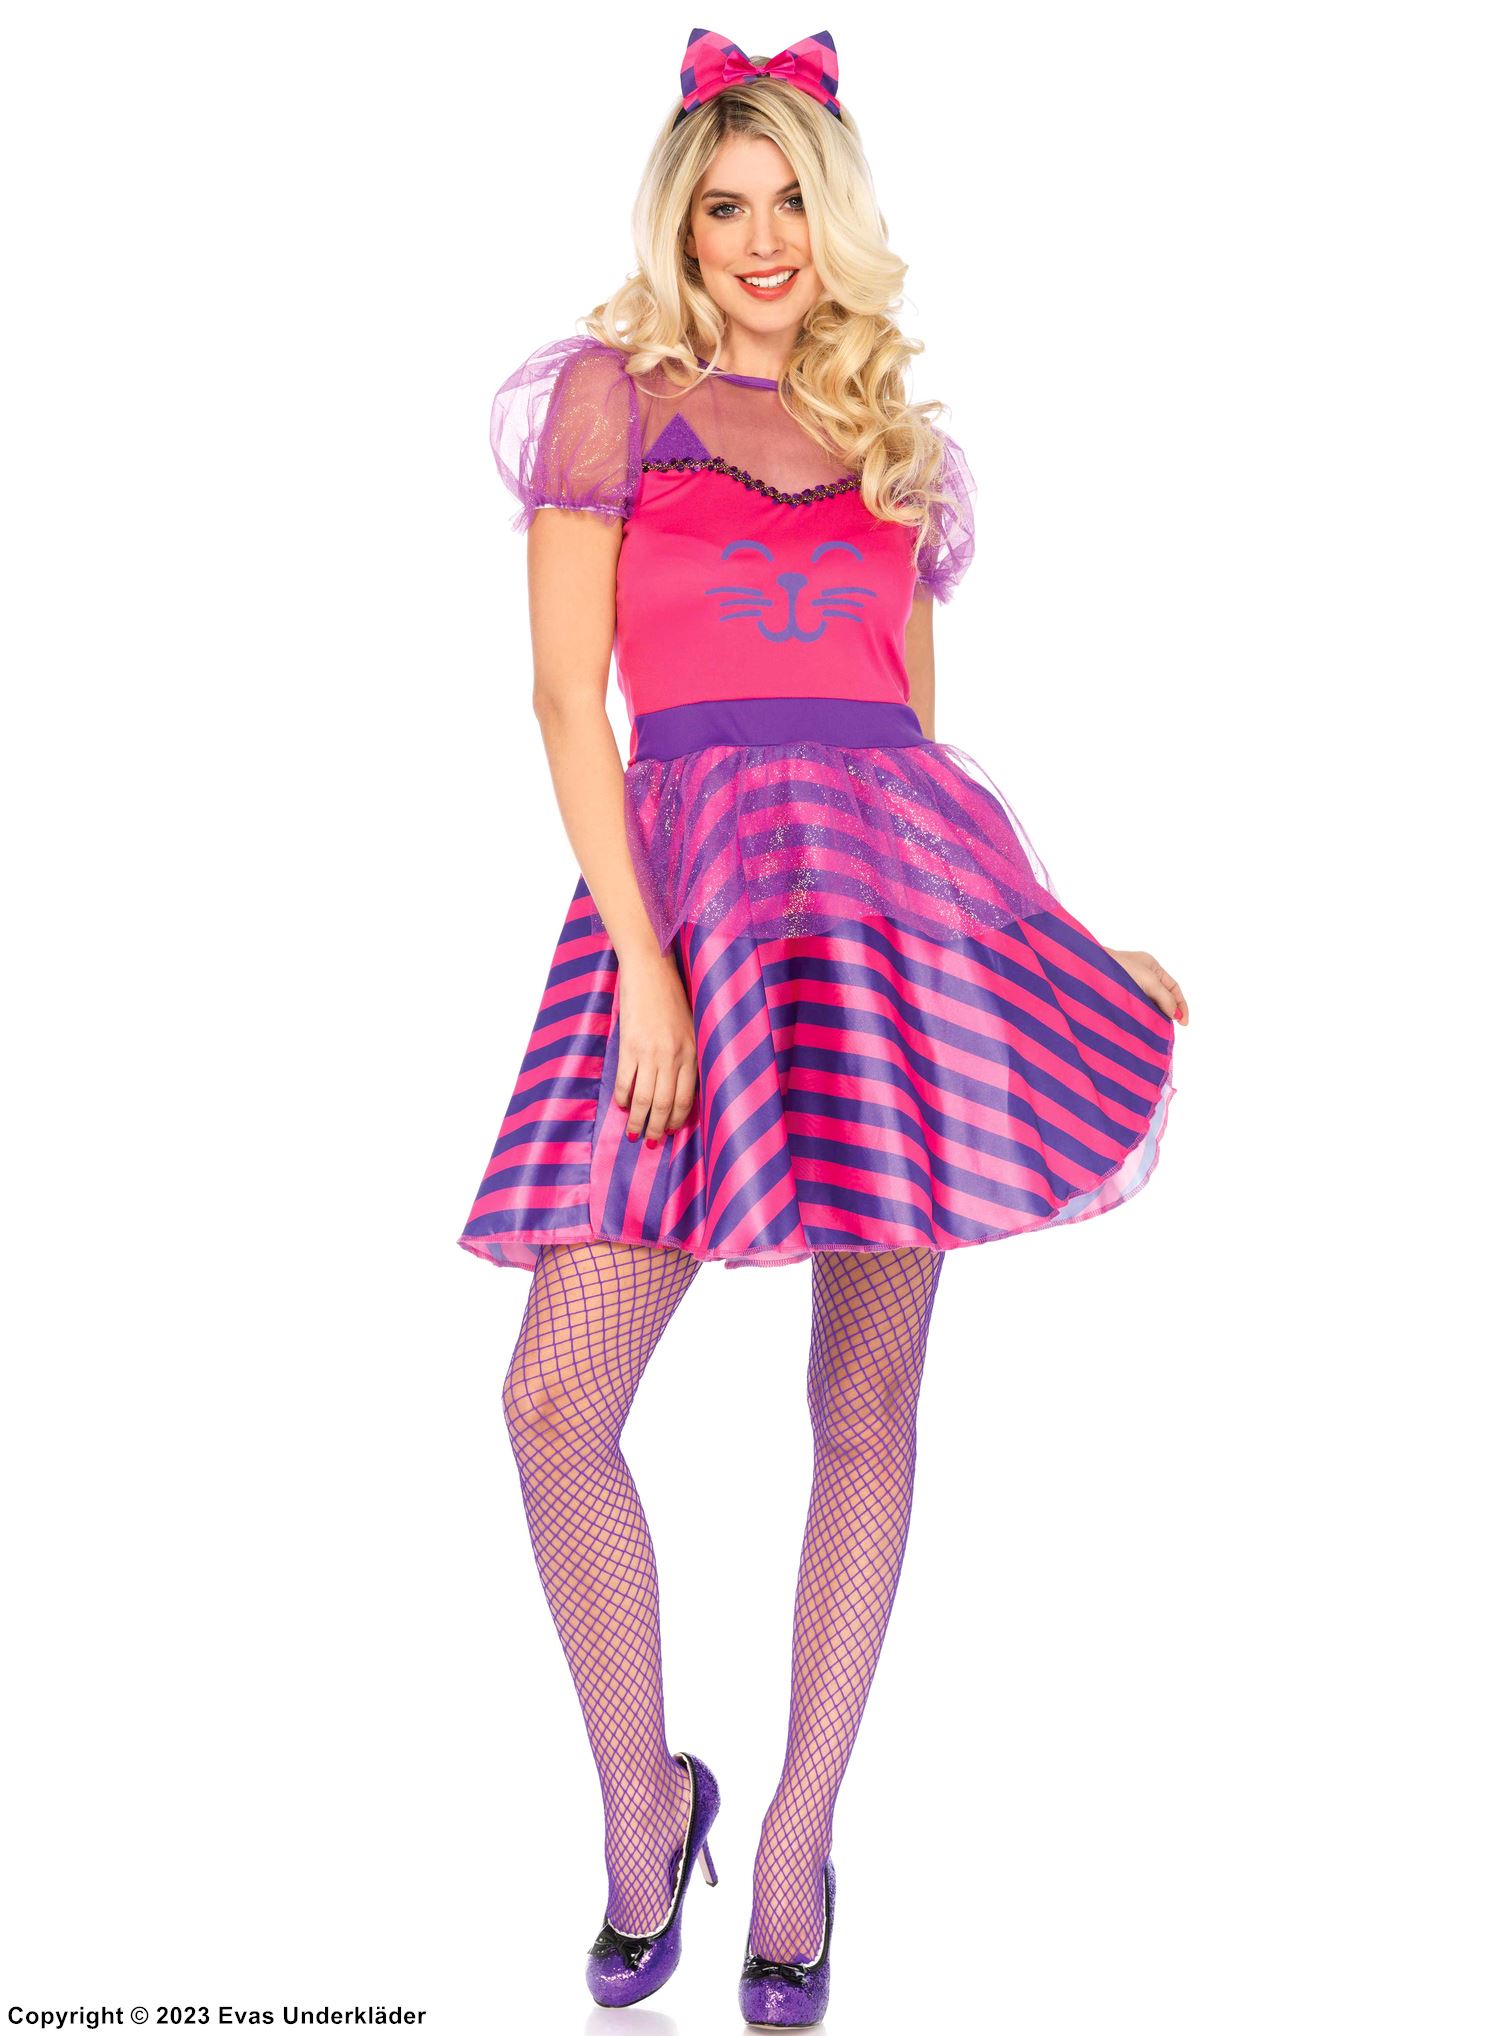 Female Cheshire Cat from Alice in Wonderland, costume dress, tail, puff sleeves, colorful stripes